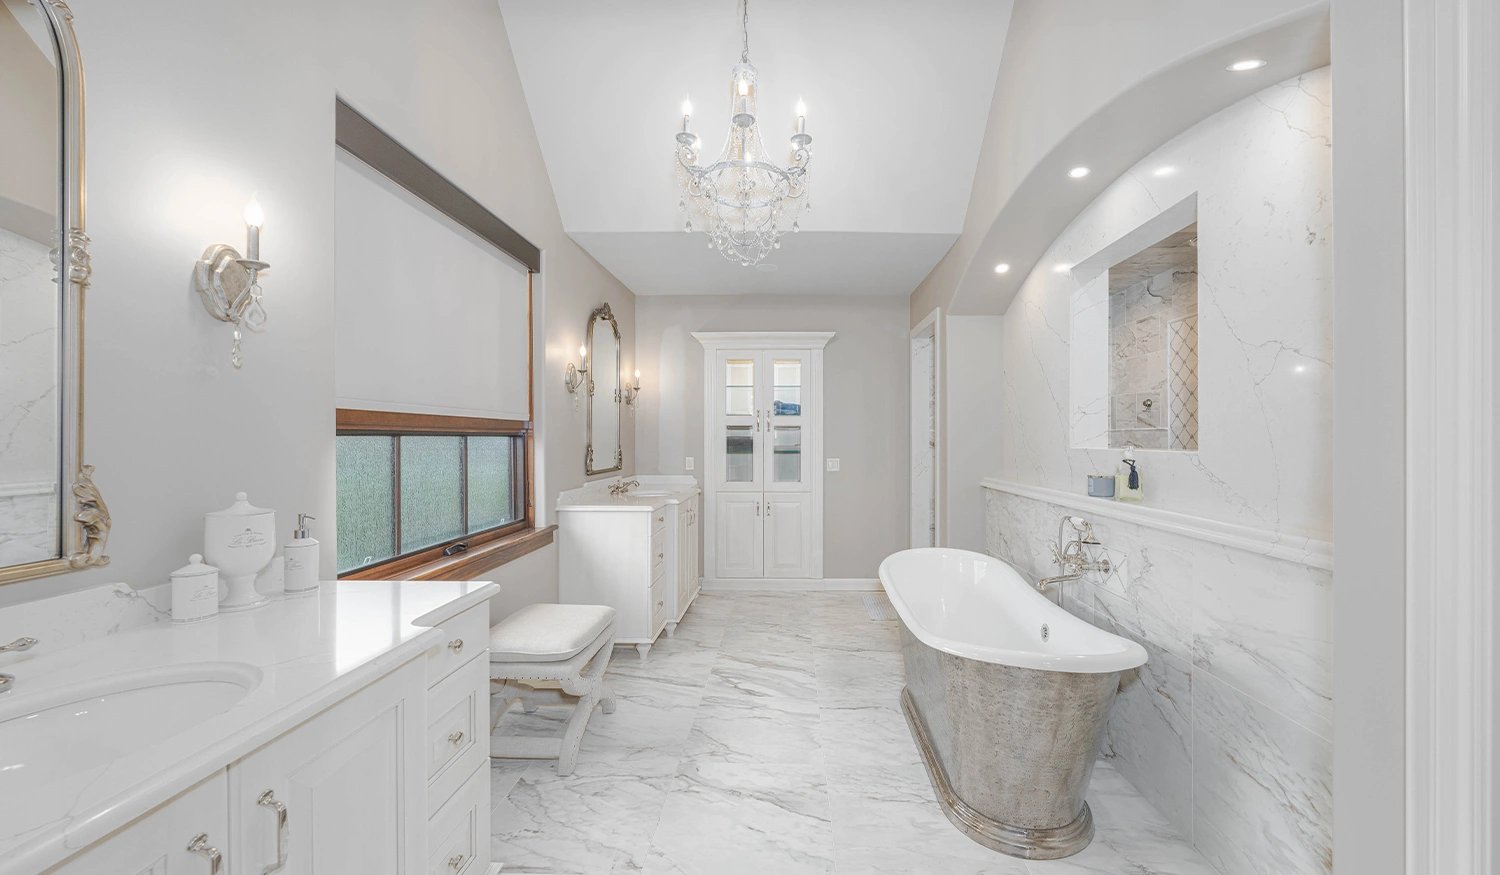 A remodeled bathroom with luxurious finishes, including marble tile and a natural stone bathtub.